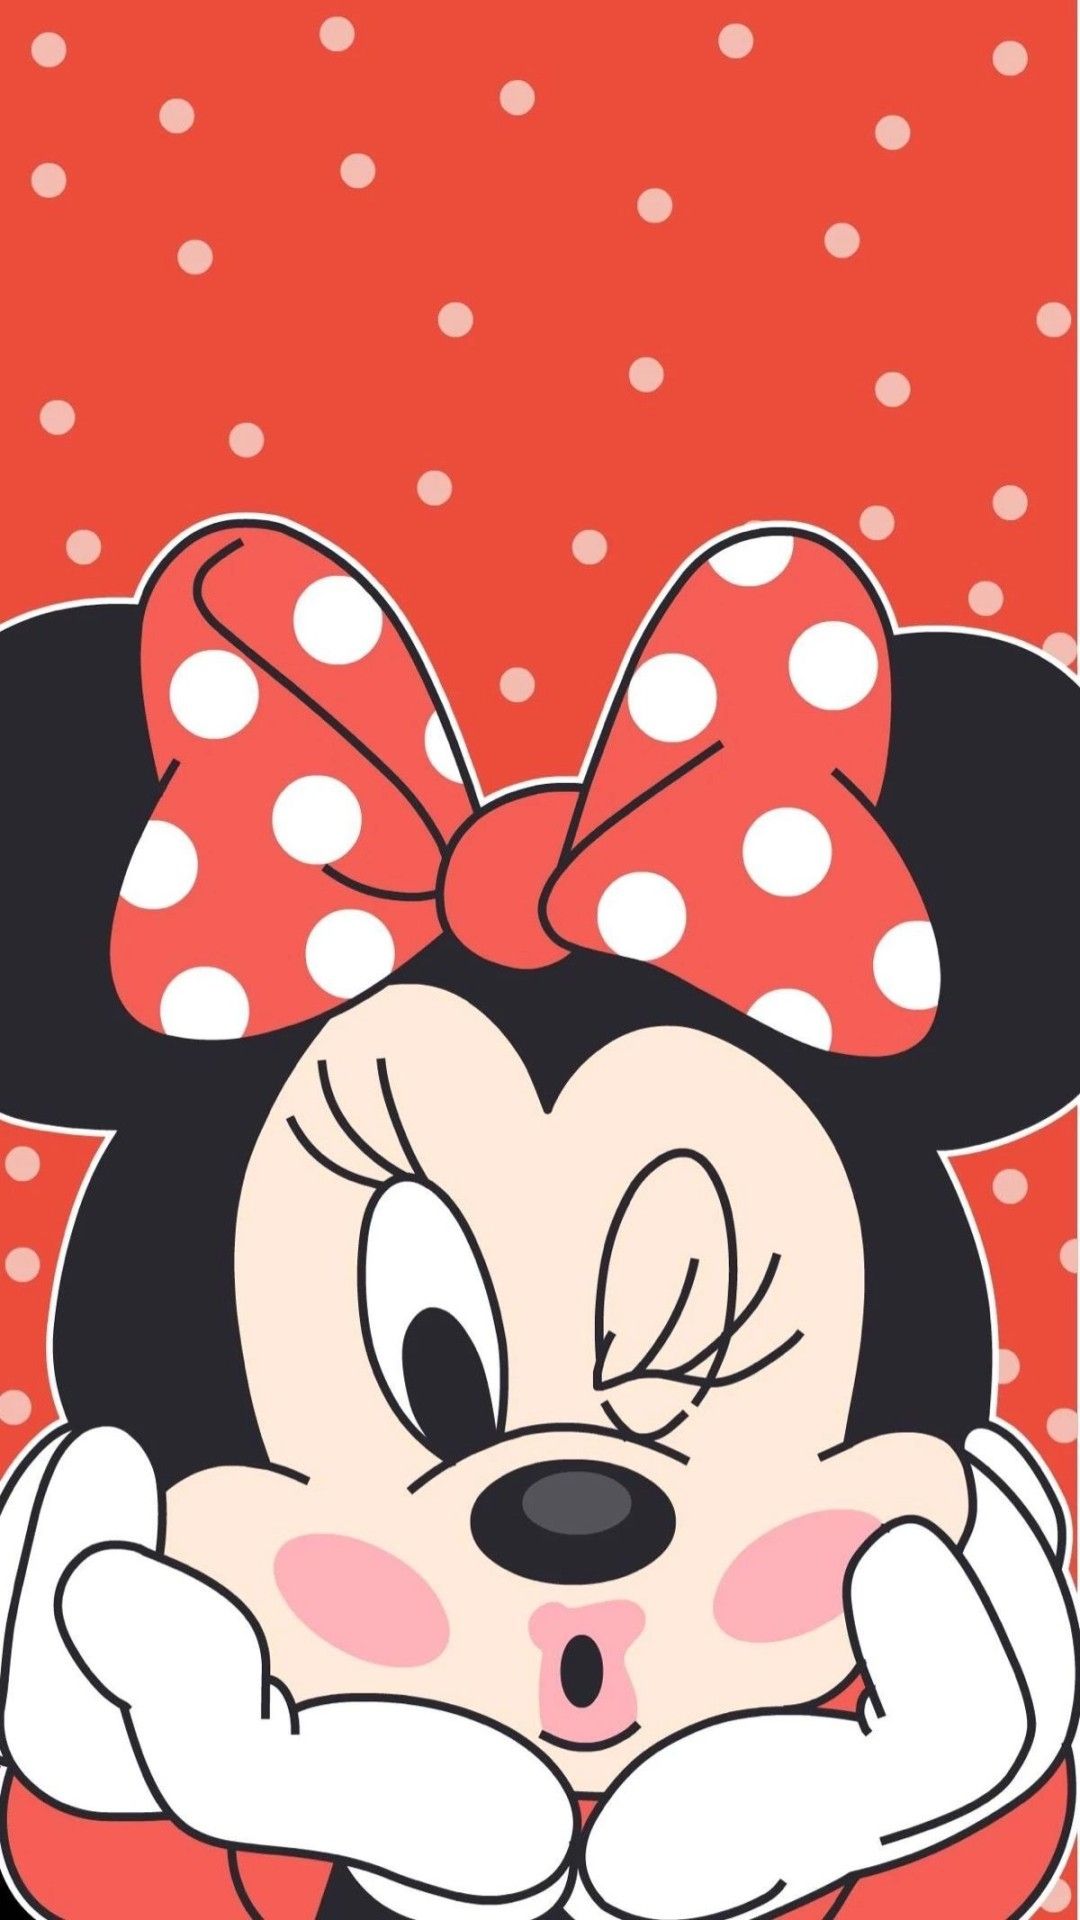 iPhone Wall MM tjn  Mickey mouse wallpaper Mickey mouse art Minnie mouse  images